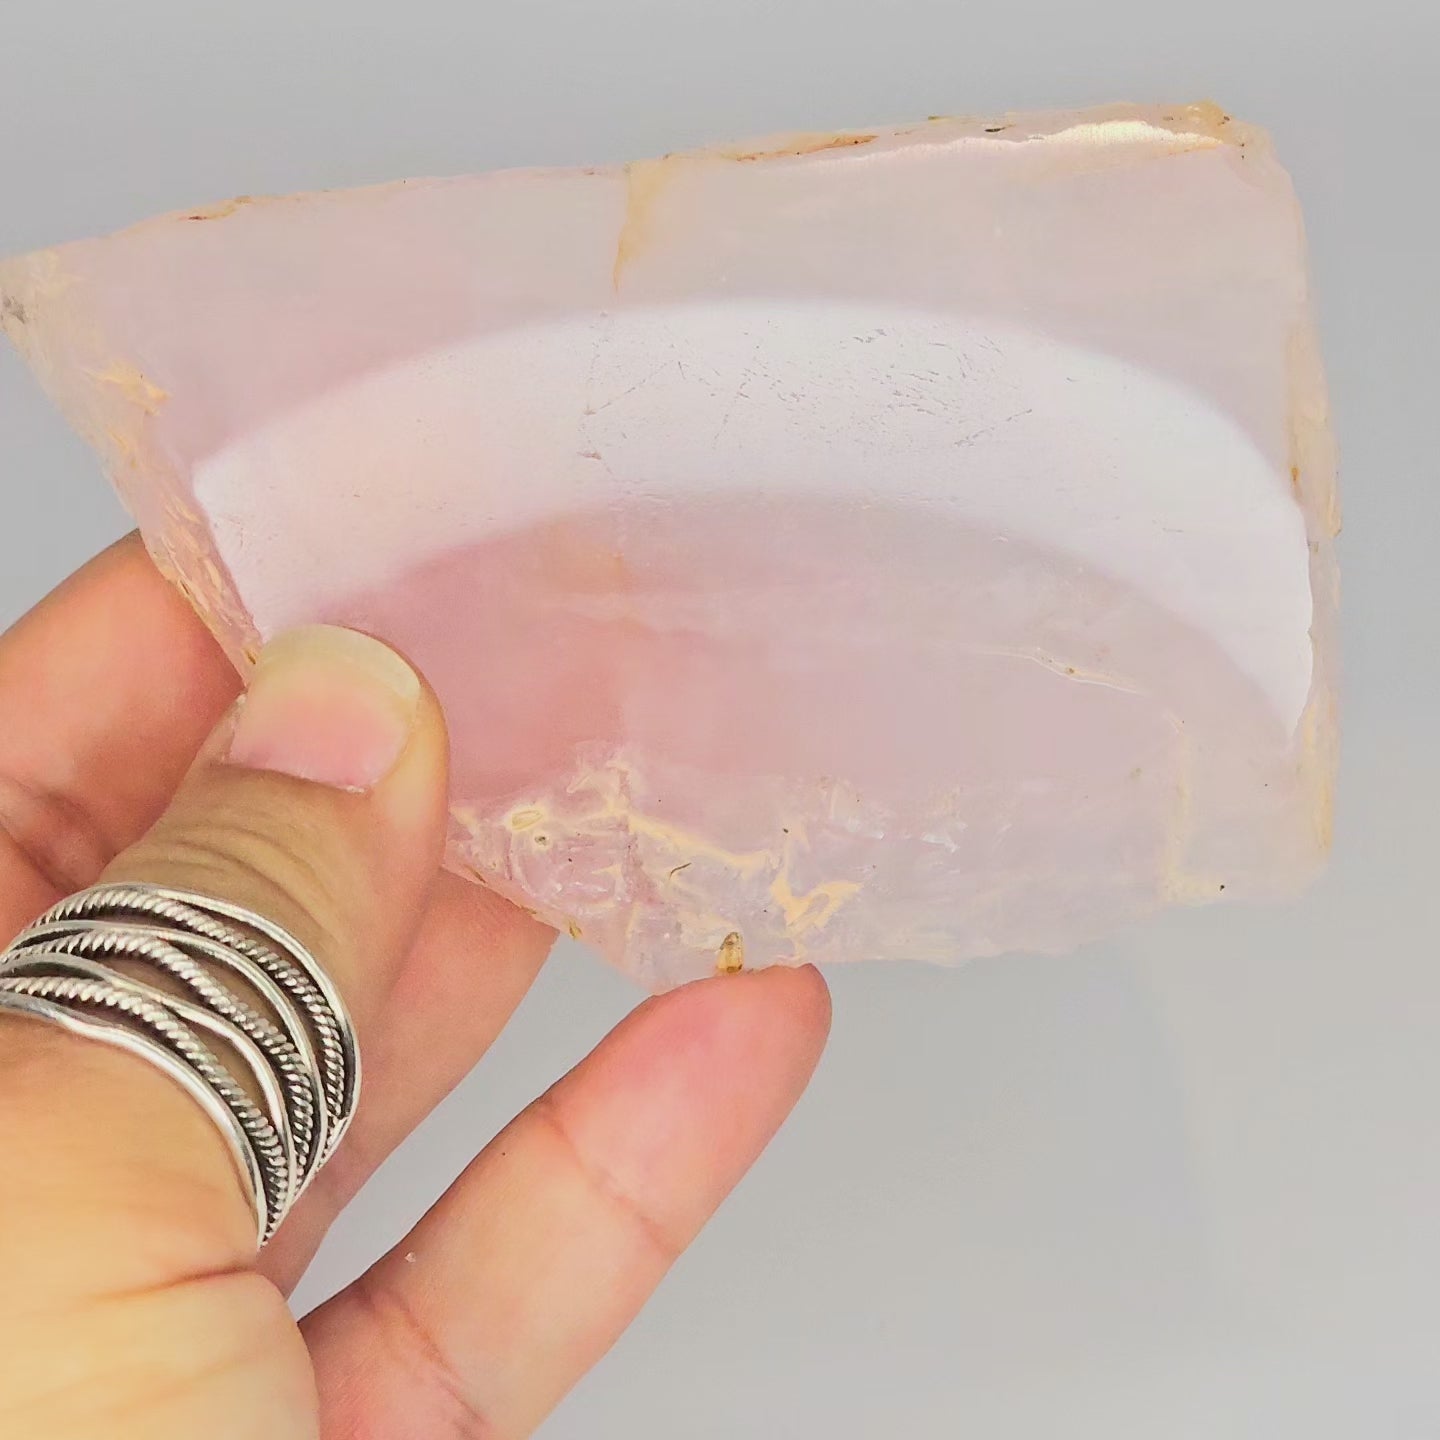 High quality Rose Quartz slab from Mozambique with rainbows.